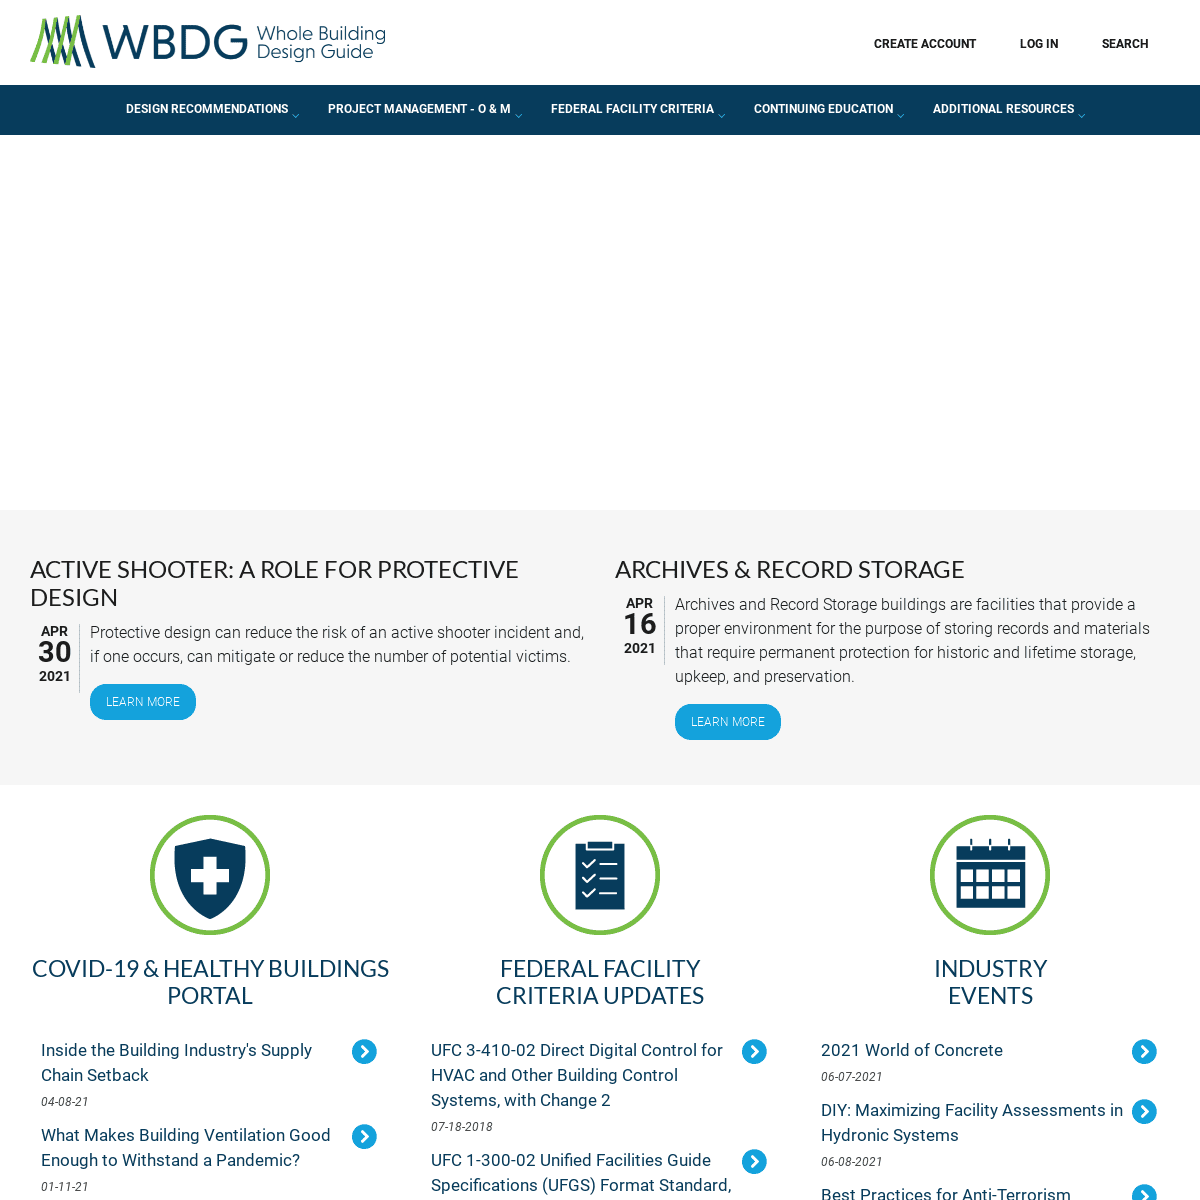 A complete backup of https://wbdg.org